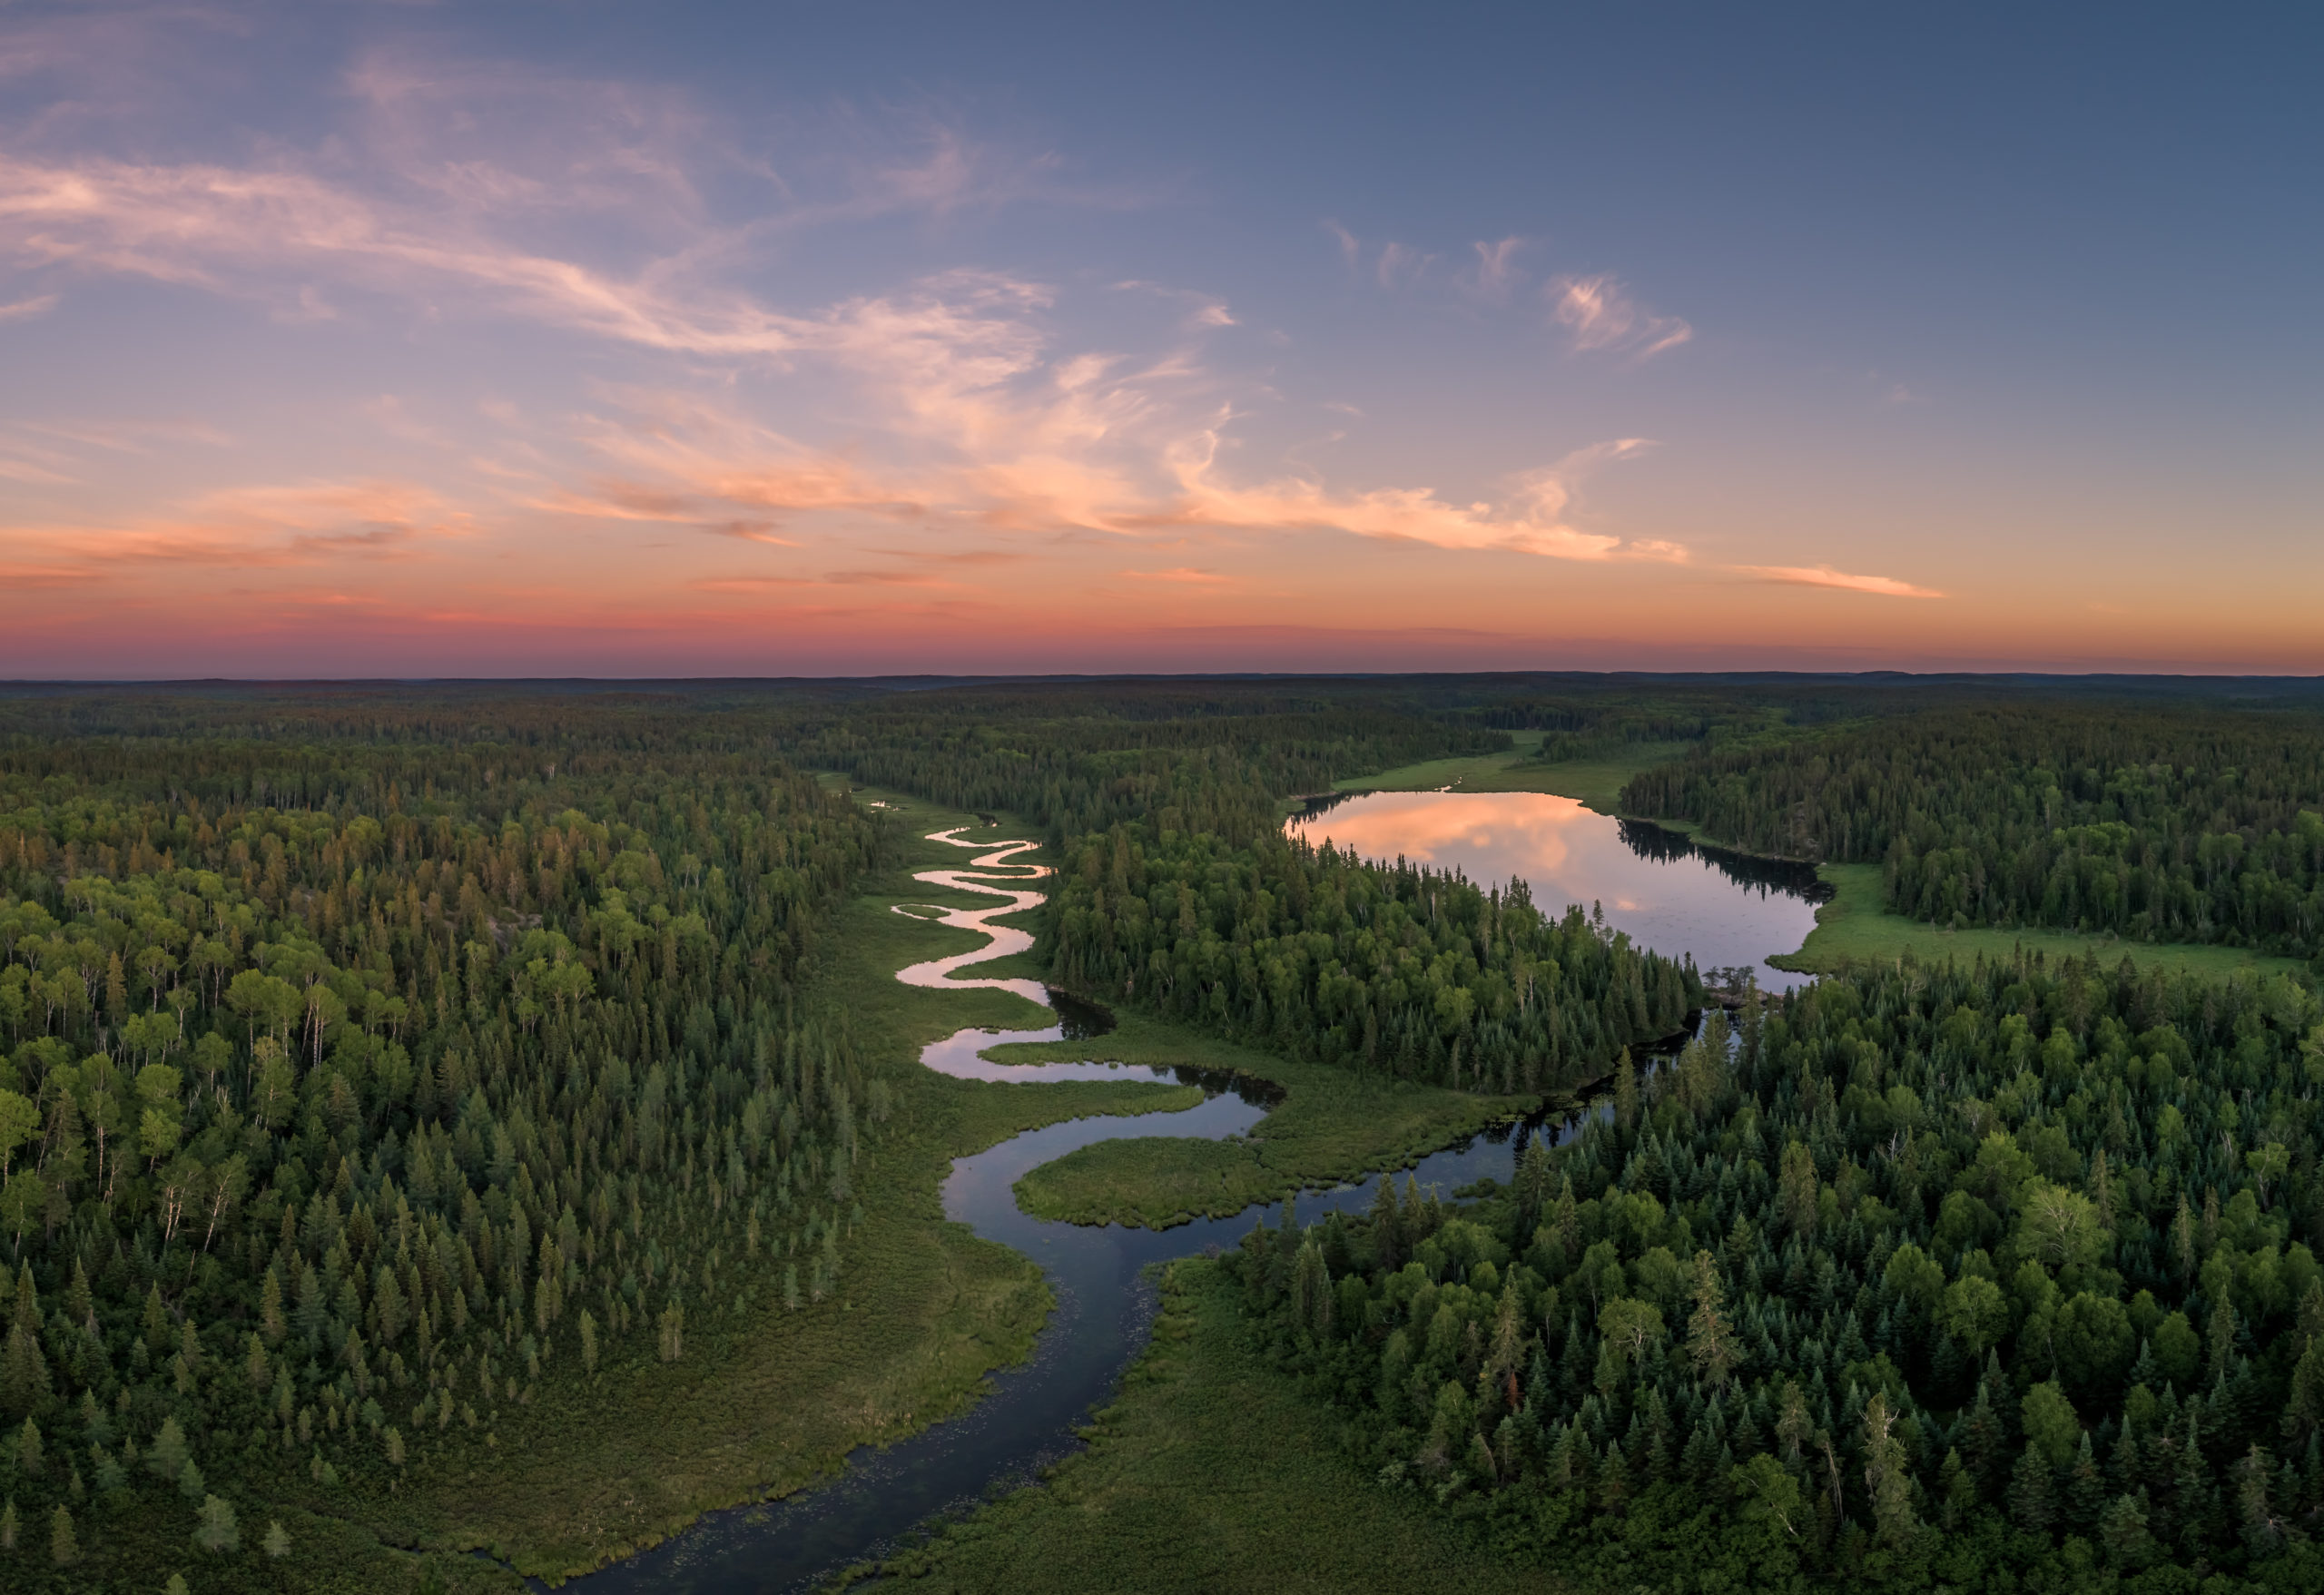 Aerial view of a winding river and trees in Northern Ontario